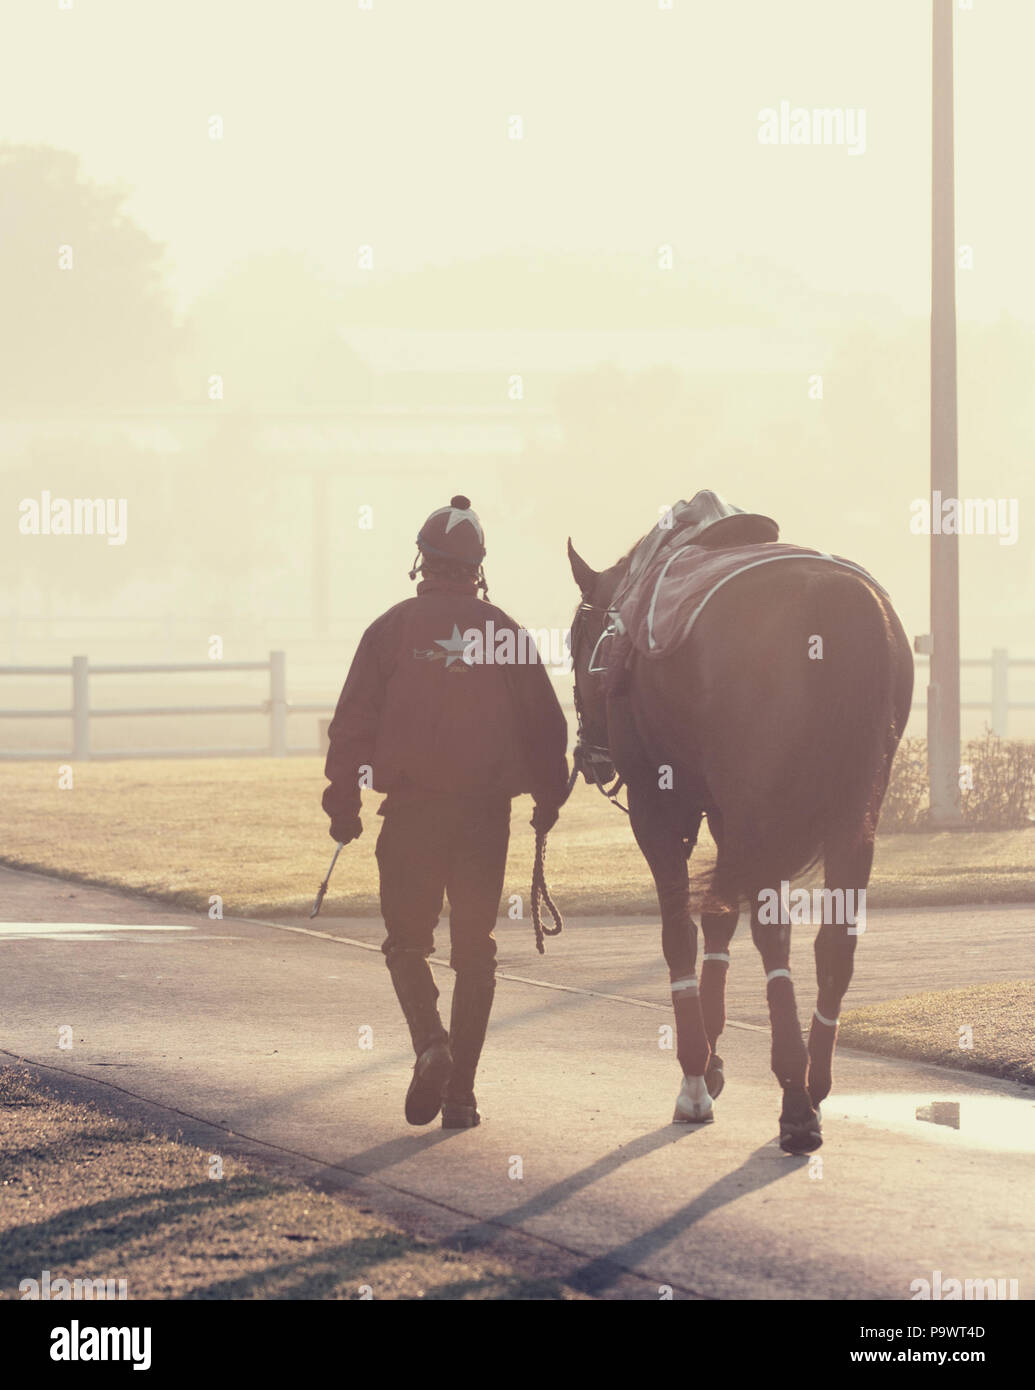 Rider leading his racehorse to be exercised at dawn at a Dubai racing stables. Stock Photo